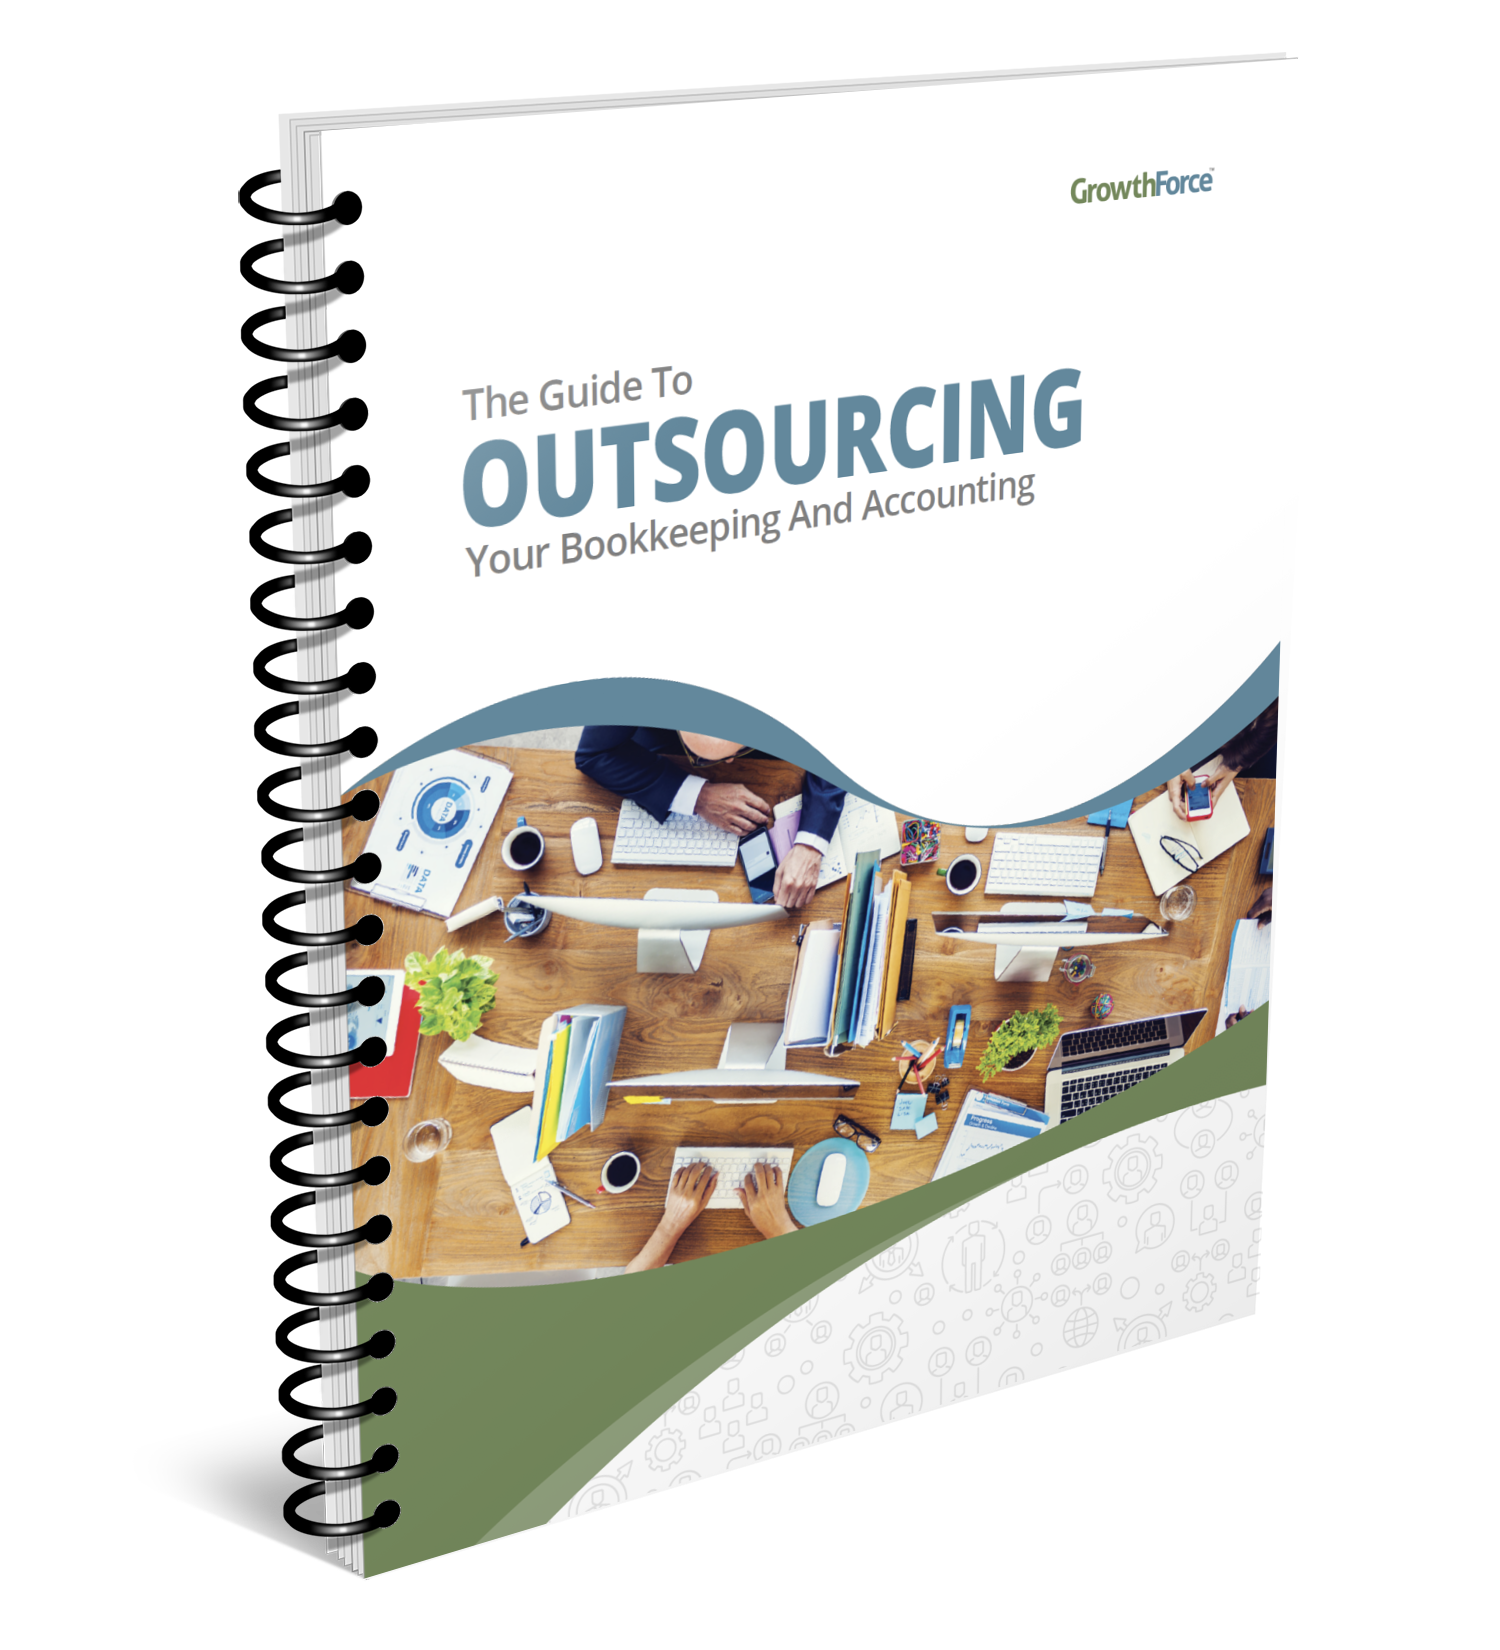 The Guide to Outsourcing